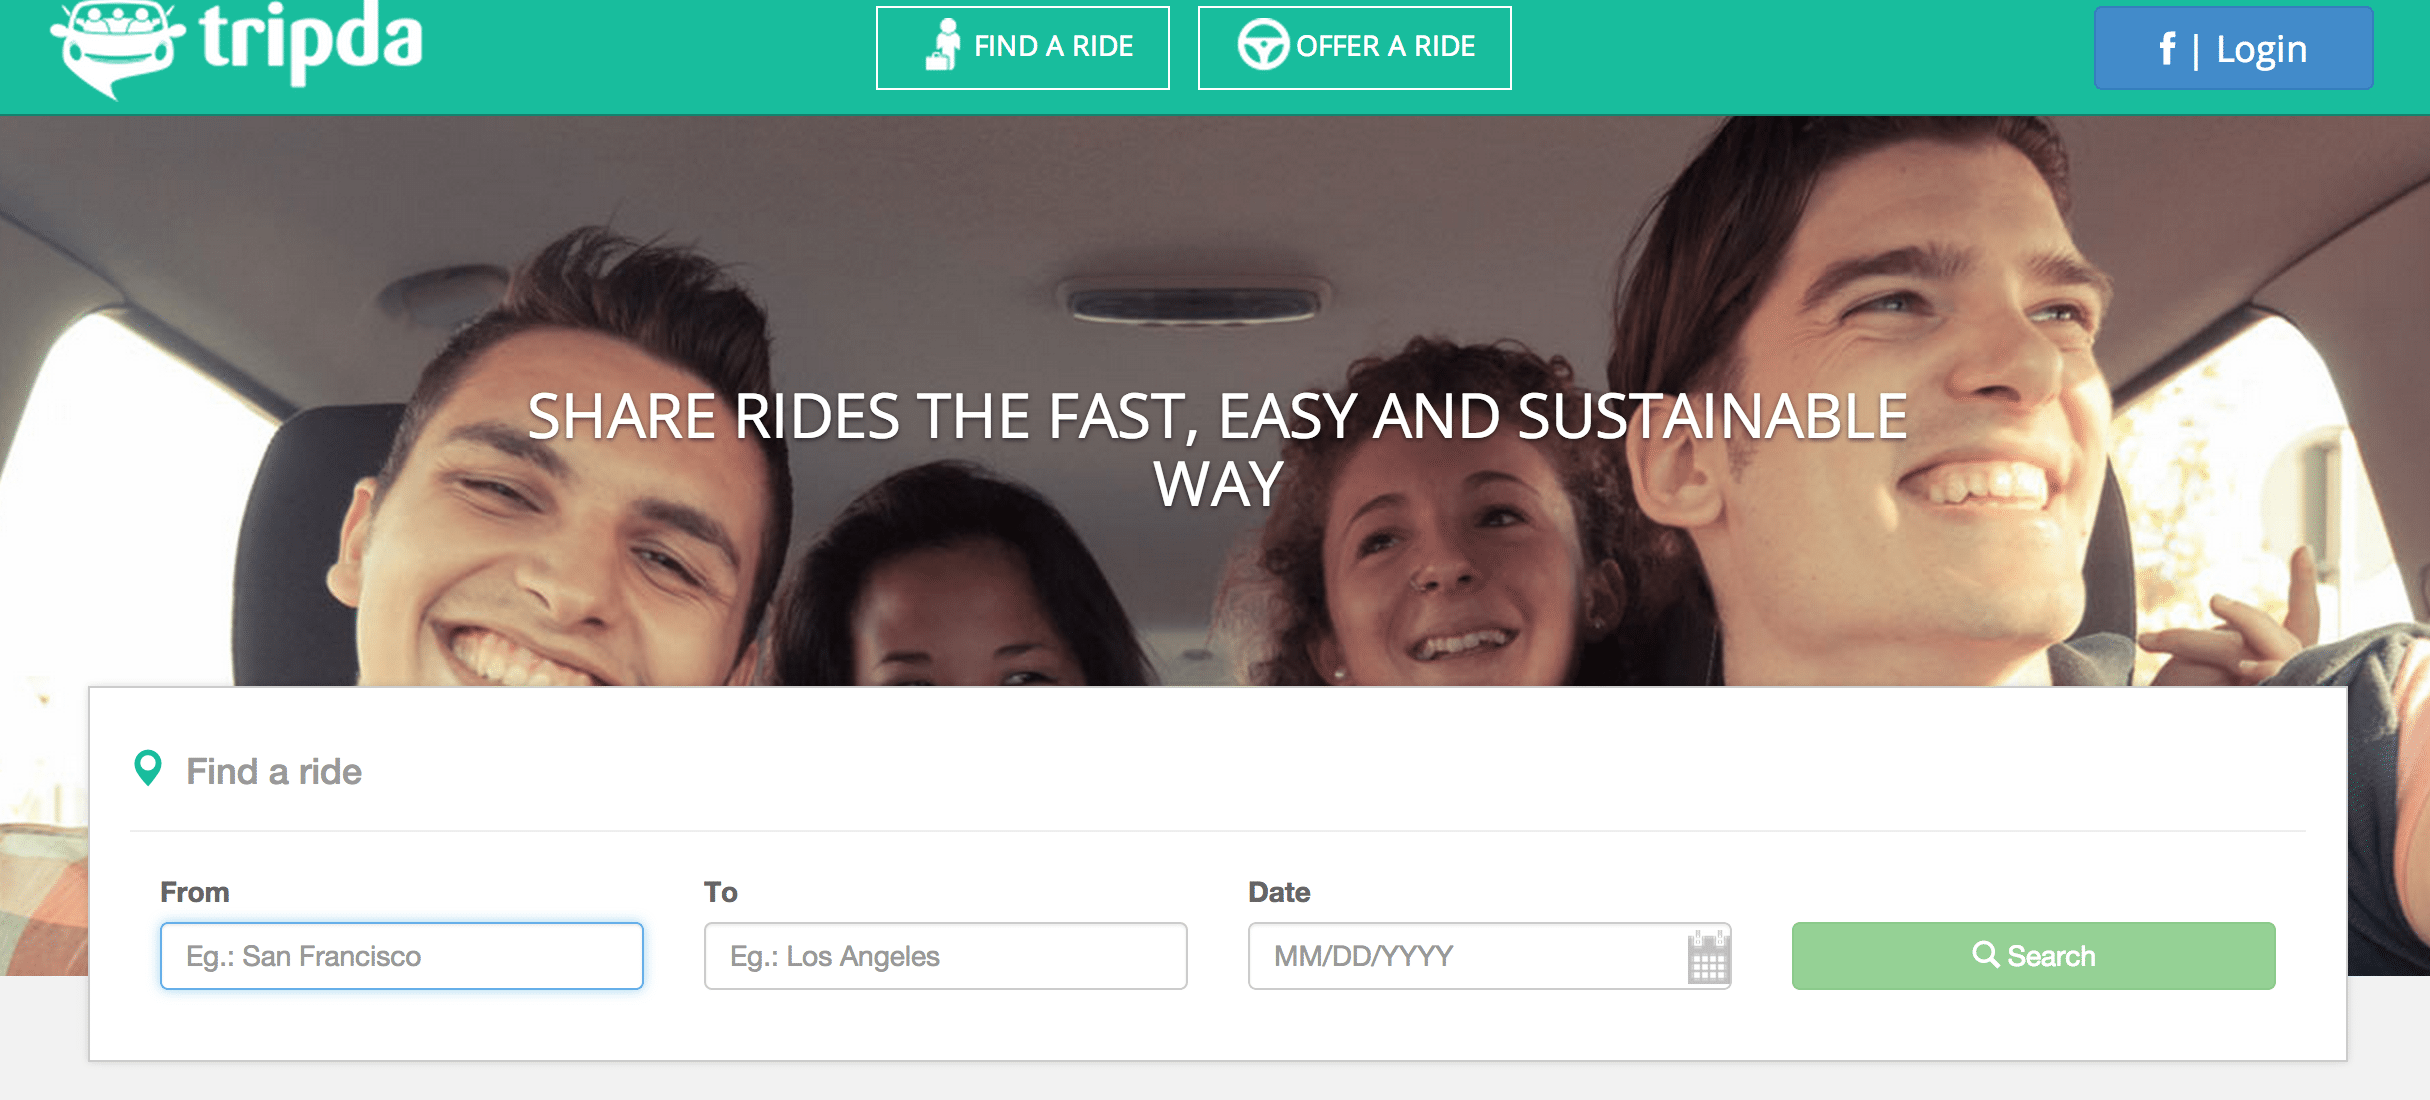 Tripda is an affordable ride-sharing platform focused on sustainability with car travel.